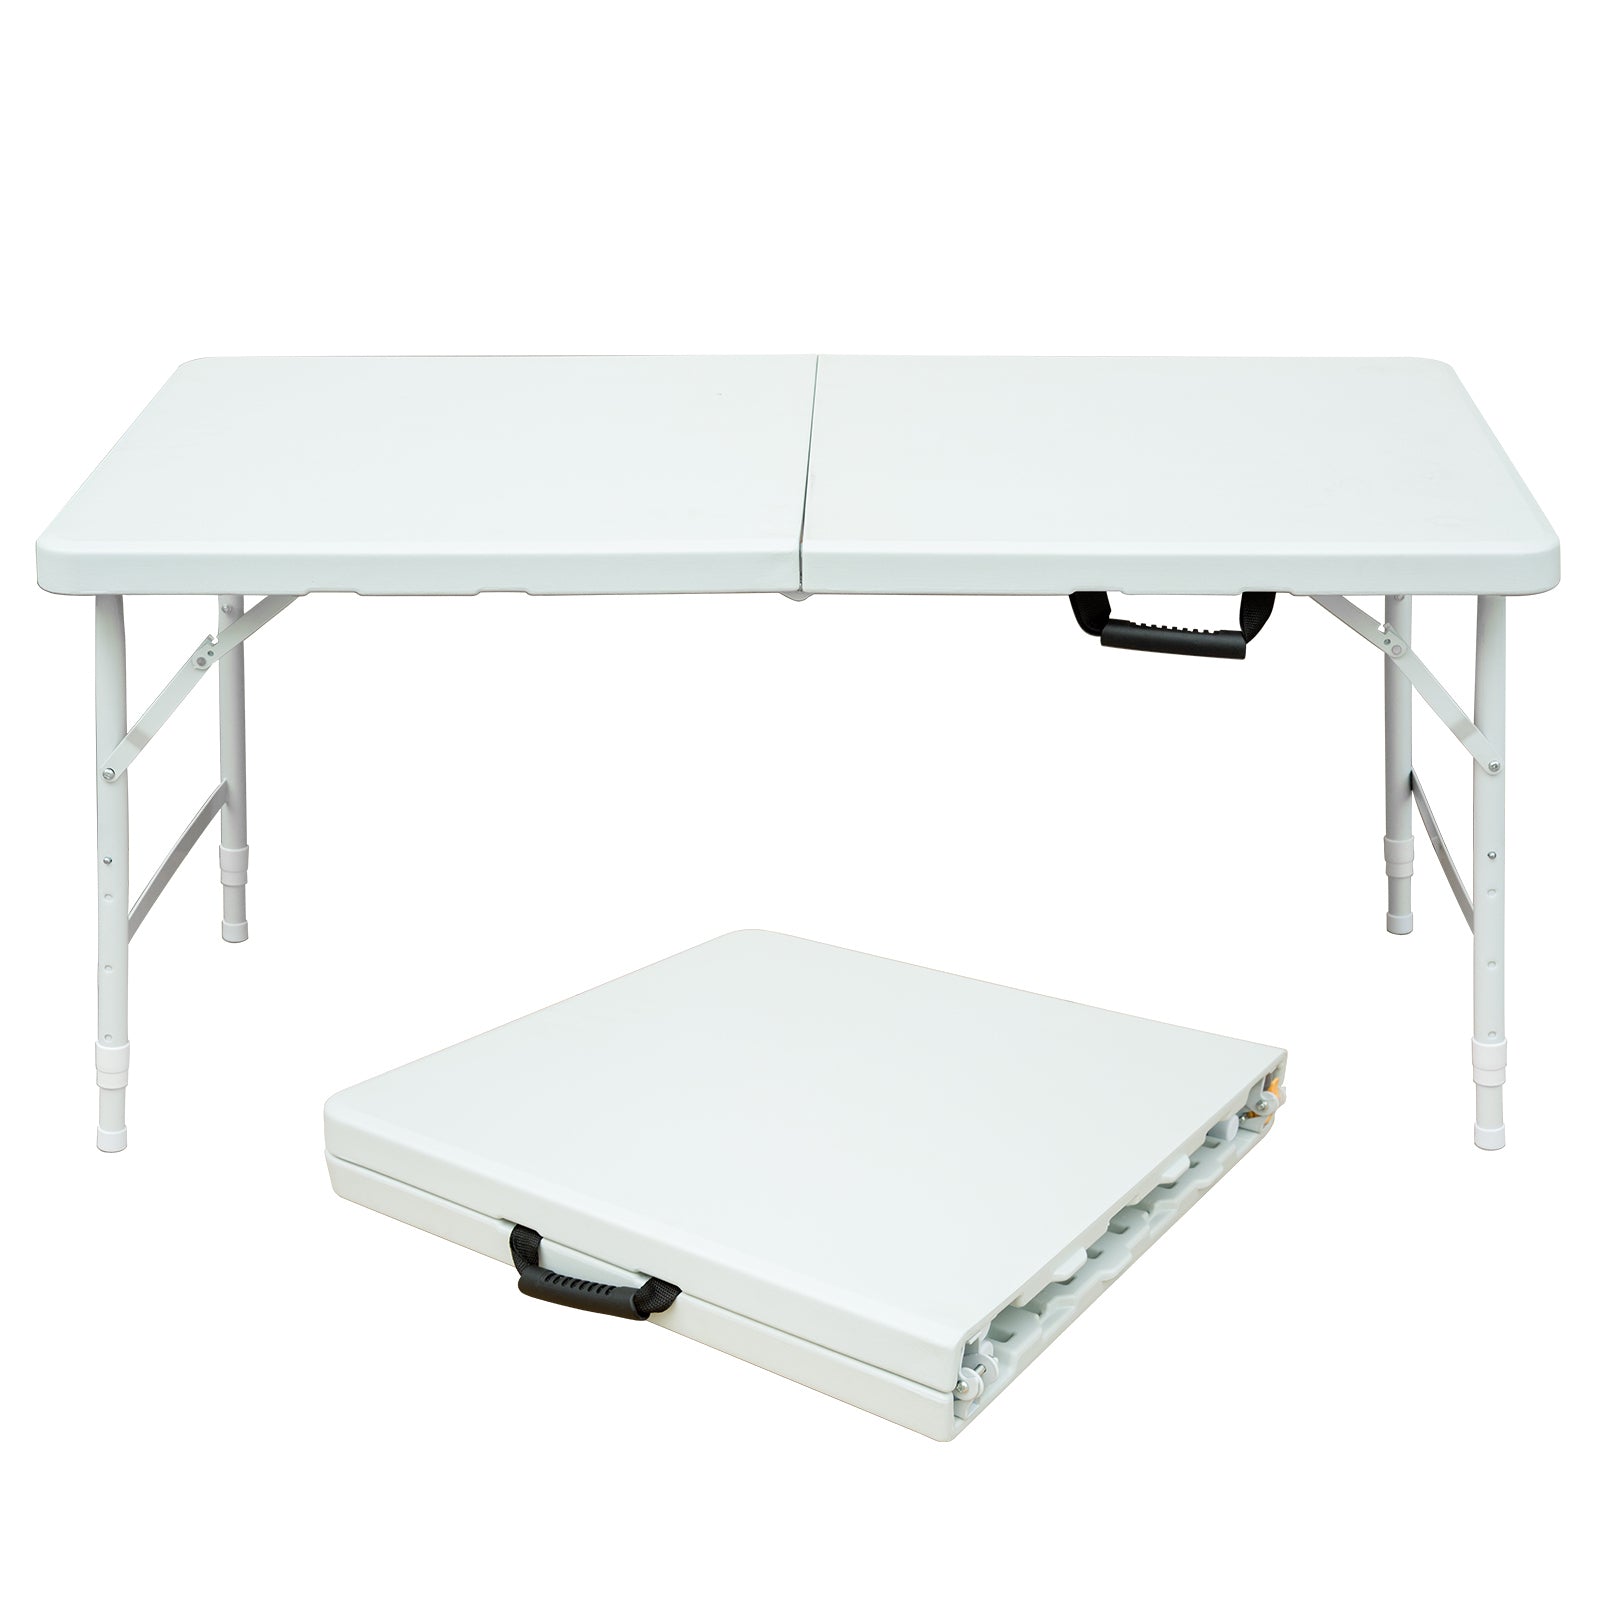 🆓🚛 4Ft Portable Folding Table Indoor & Outdoor Maximum Weight 135Kg Foldable Table for Camping White